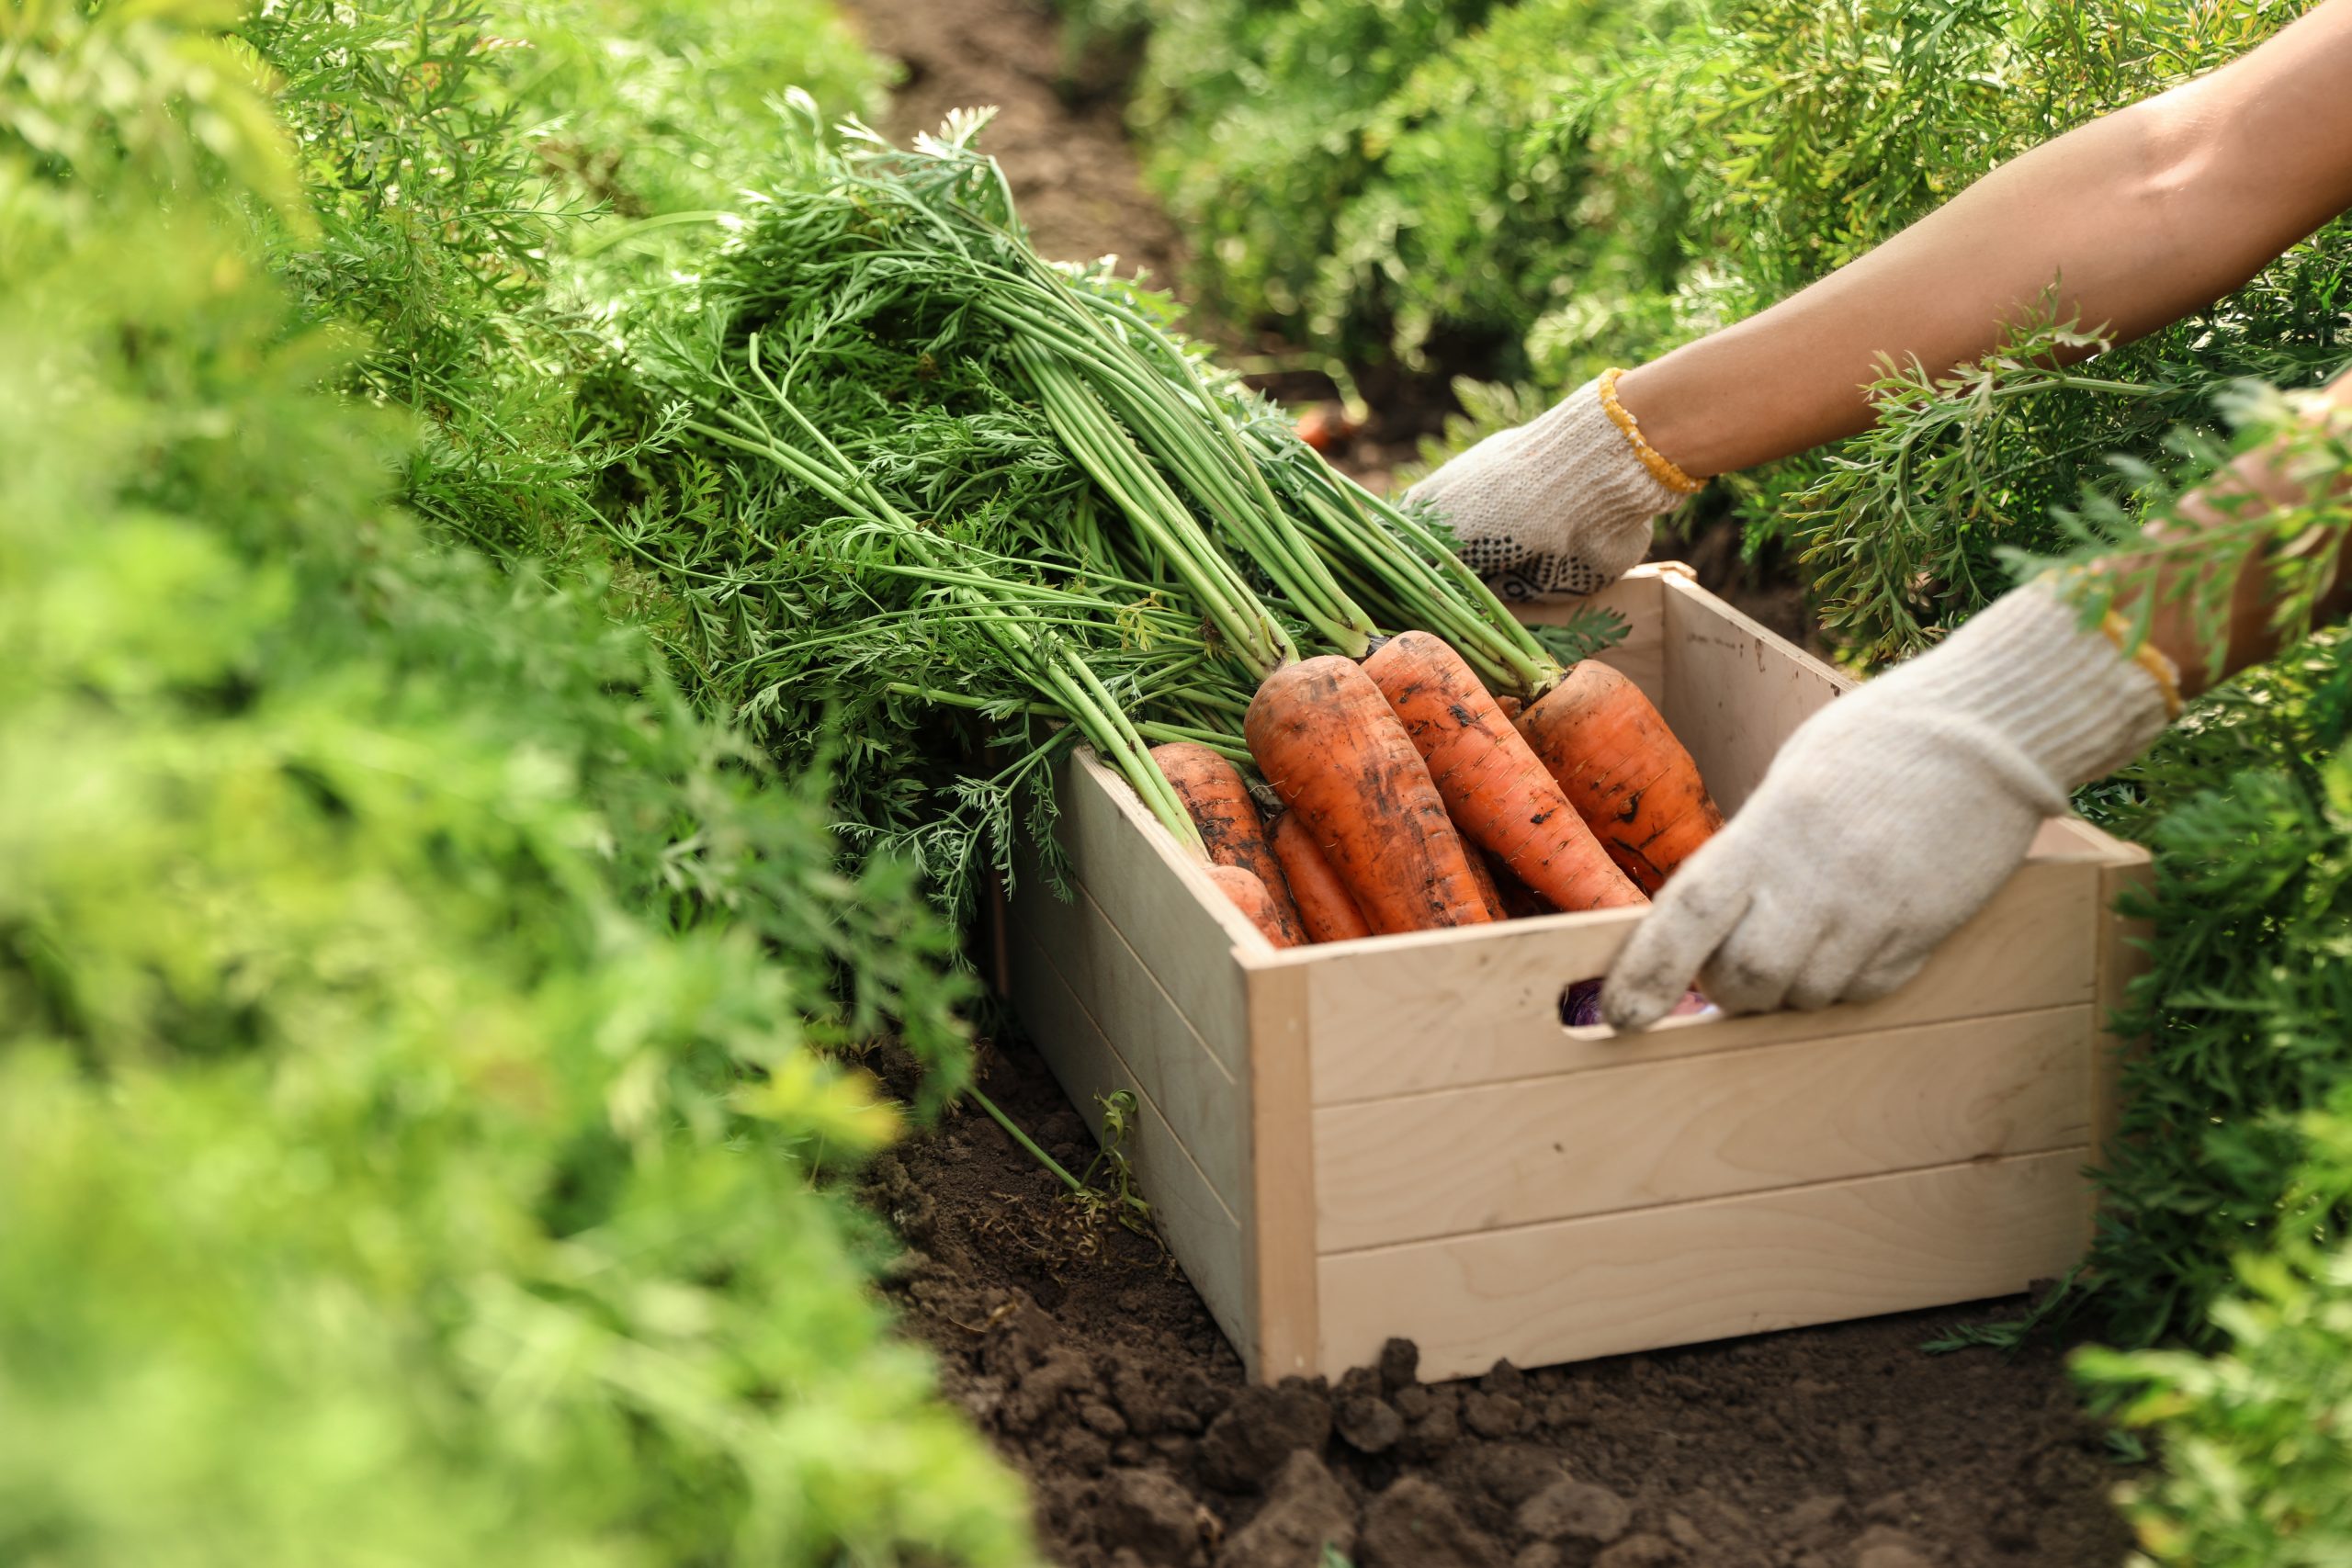 How to Get Into Vegetable Farming 